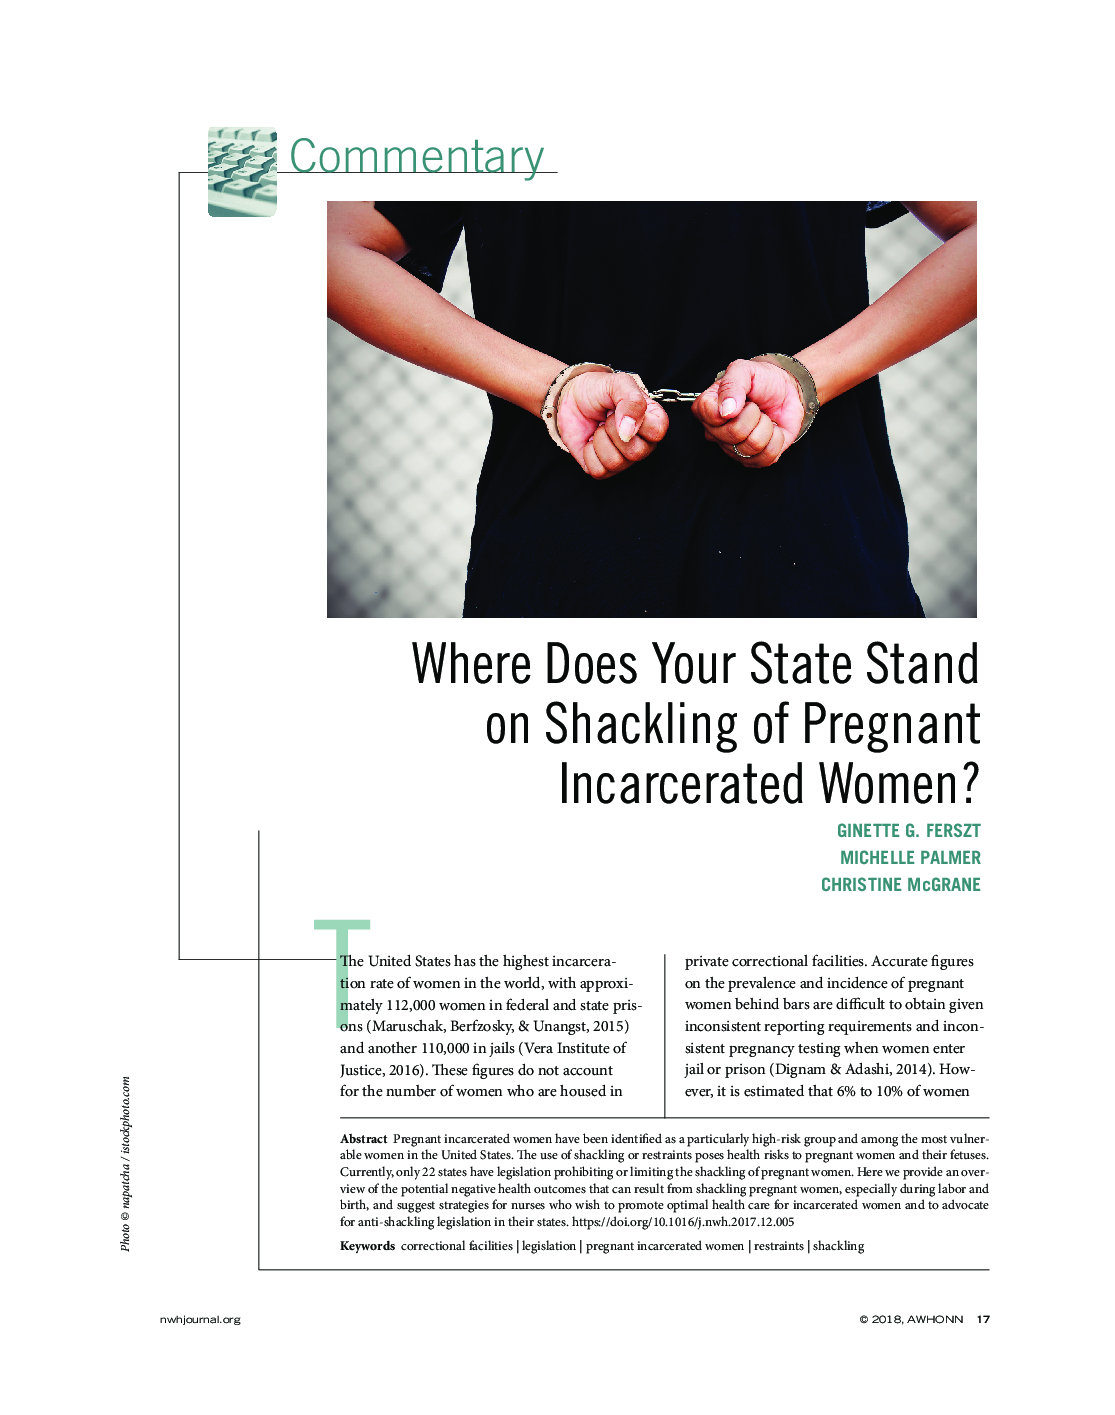 Where Does Your State Stand on Shackling of Pregnant Incarcerated Women?